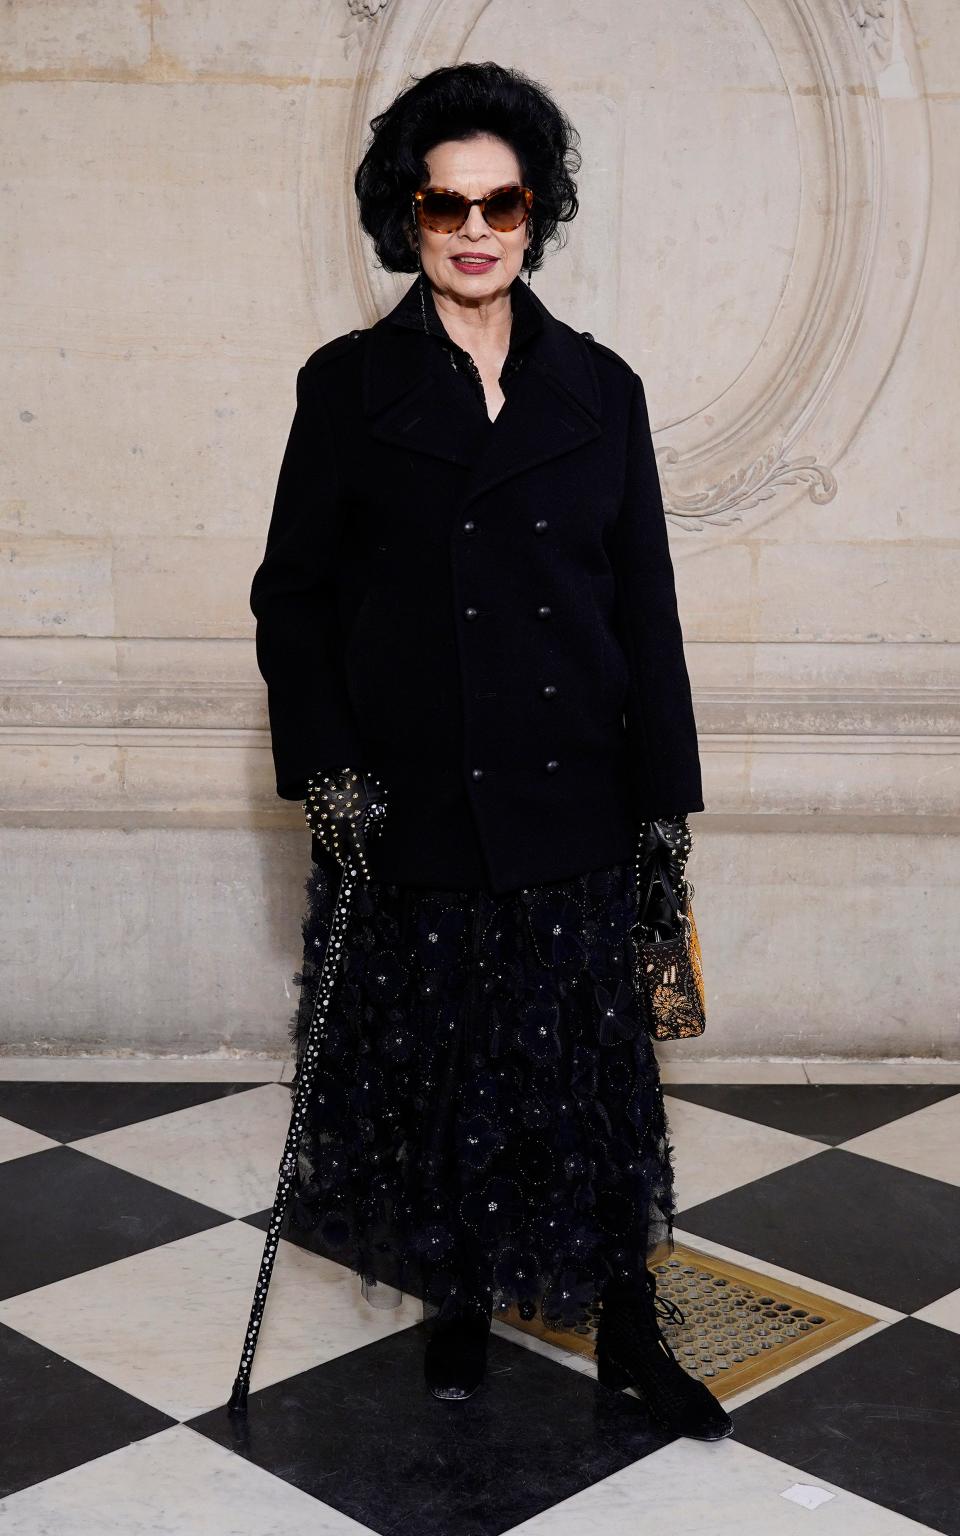 Bianca Jagger wears a black look designed by Maria Grazia Chiuri for the spring/summer 2020 Couture show in Paris - Getty